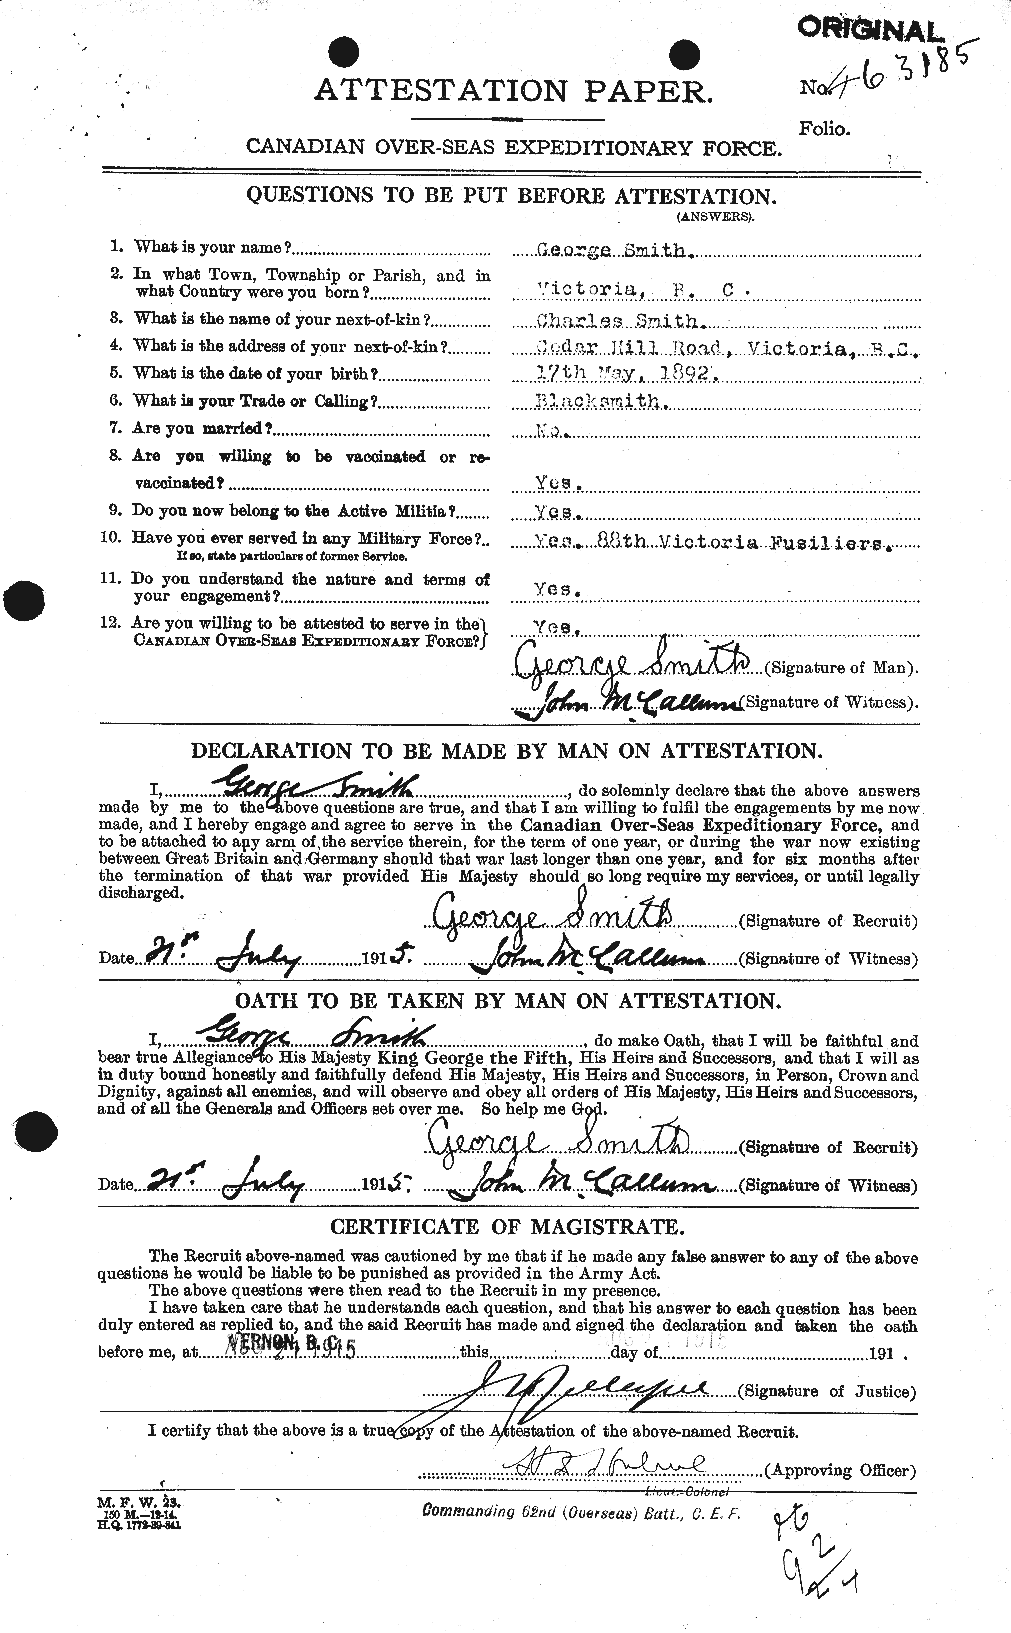 Personnel Records of the First World War - CEF 102957a